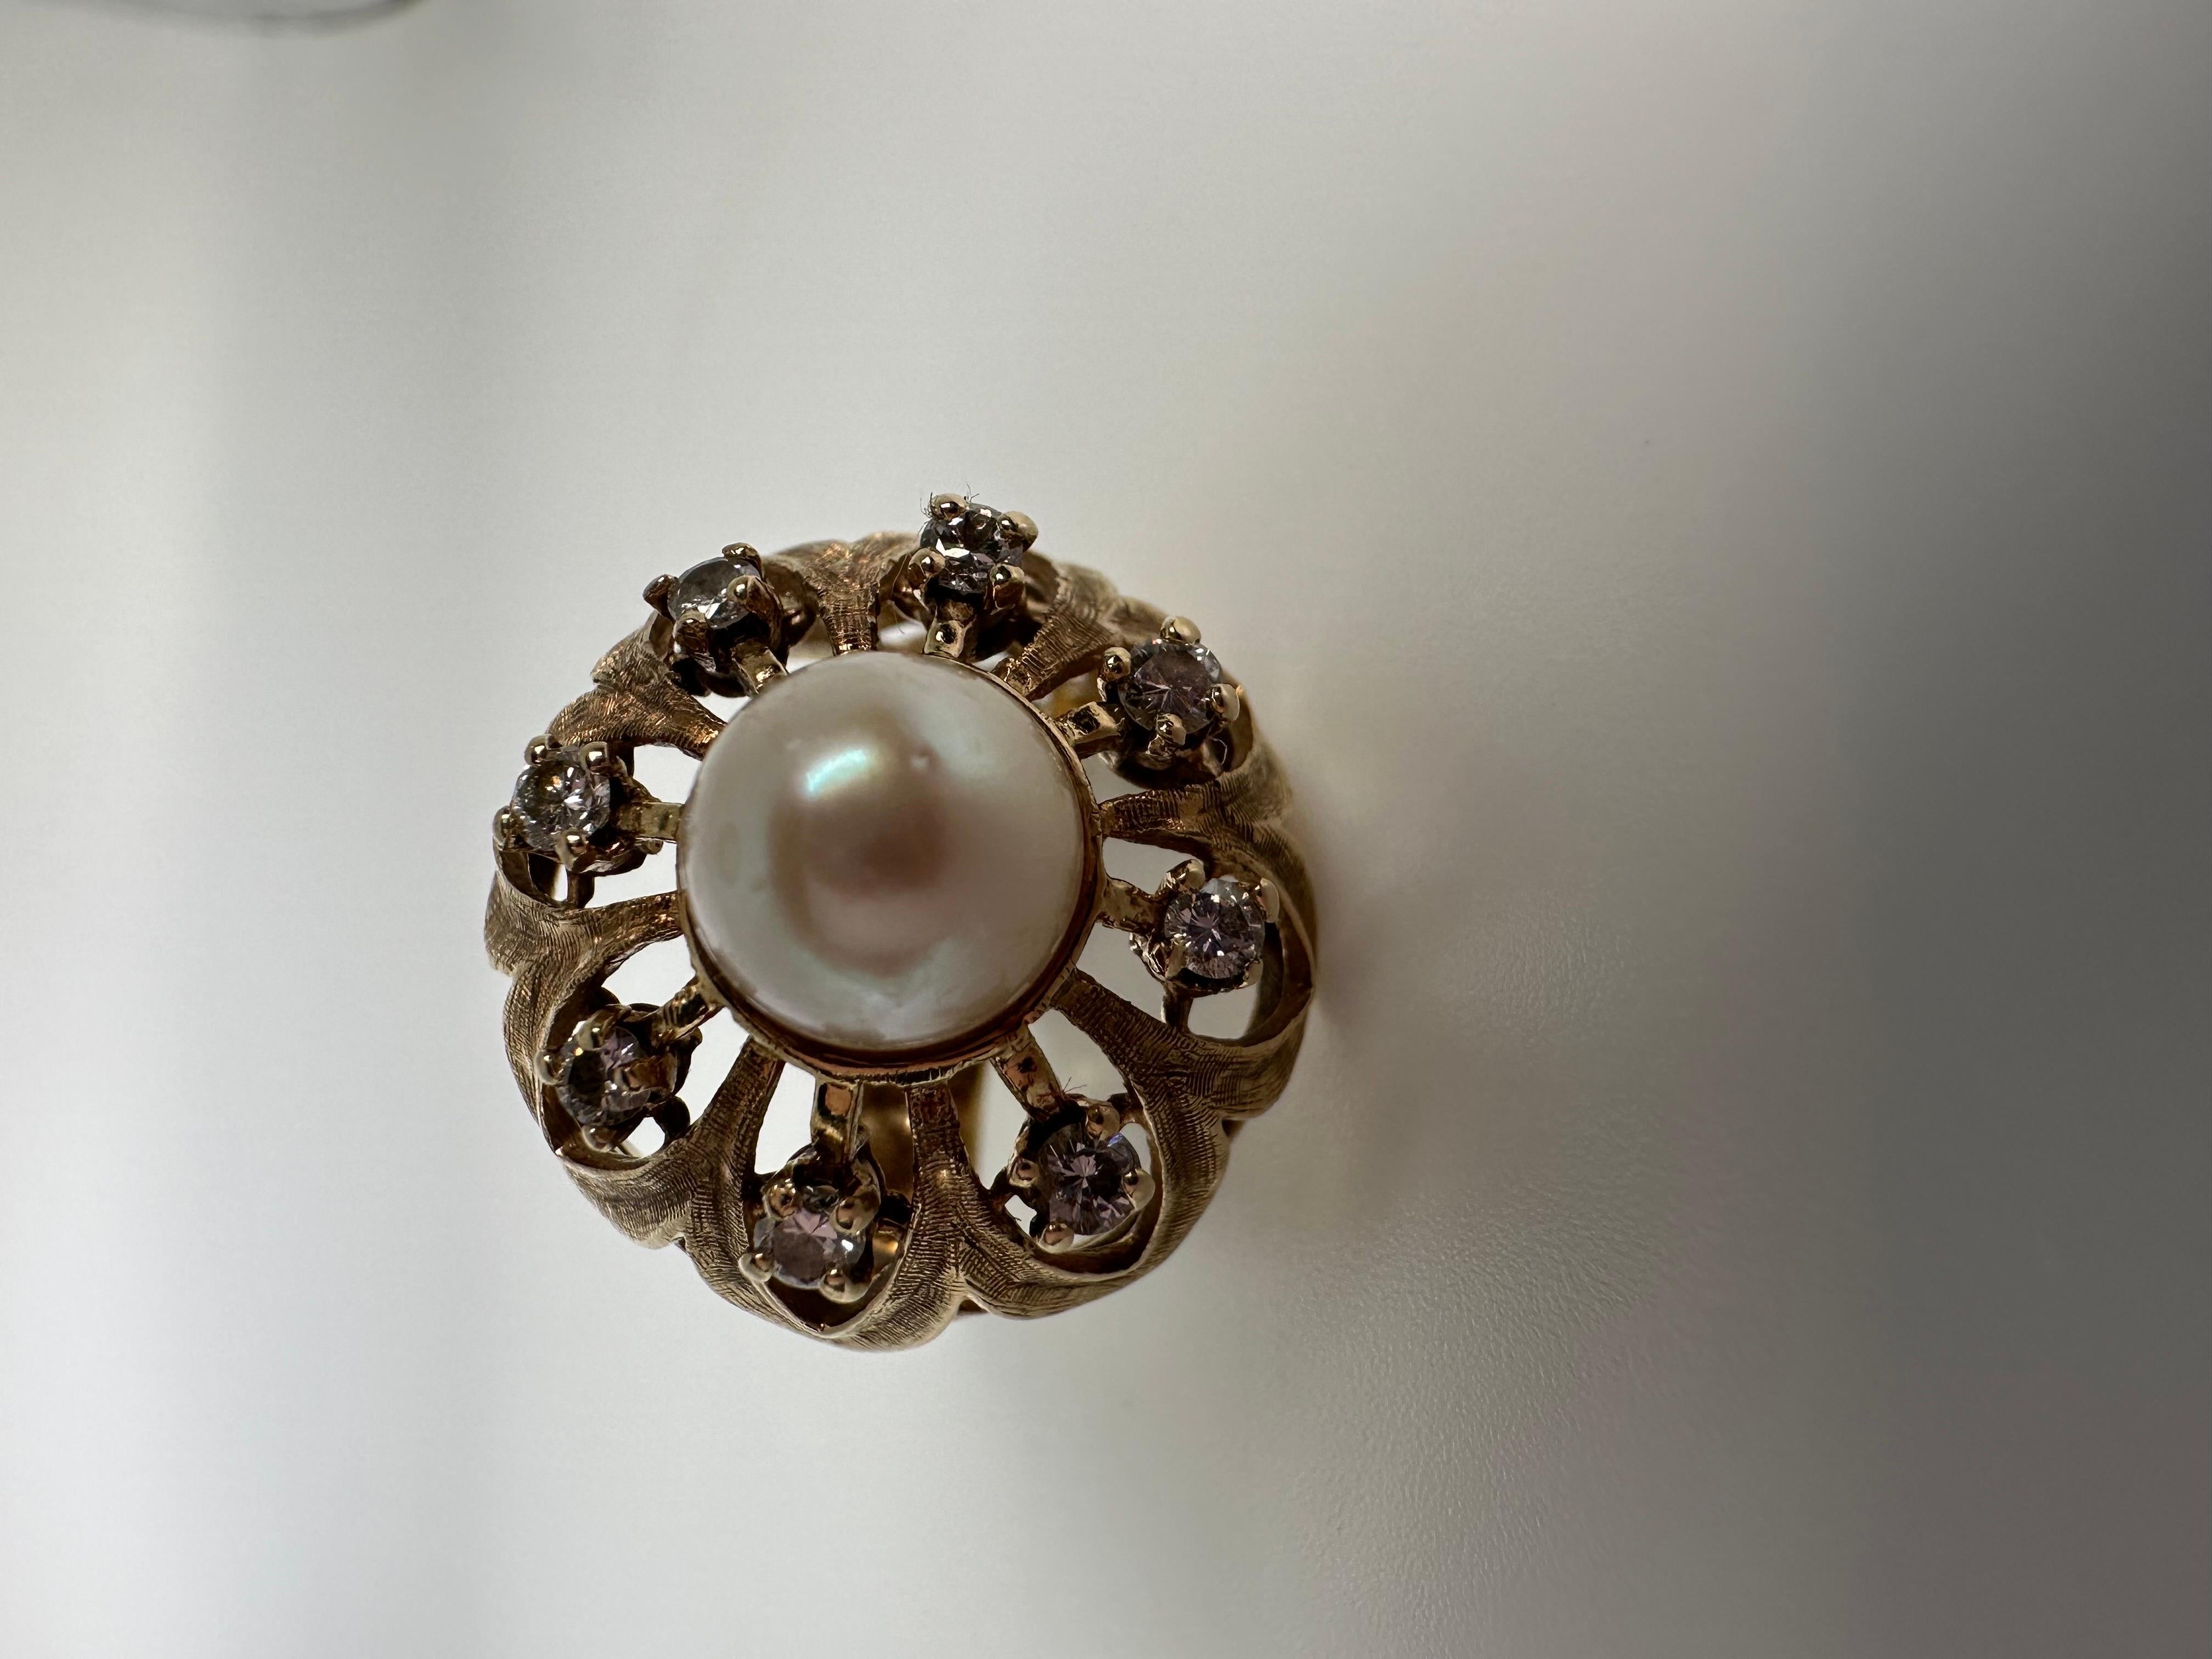 Royal Pearl and diamond ring in 14KT yellow gold dome designer ring In Excellent Condition For Sale In Jupiter, FL